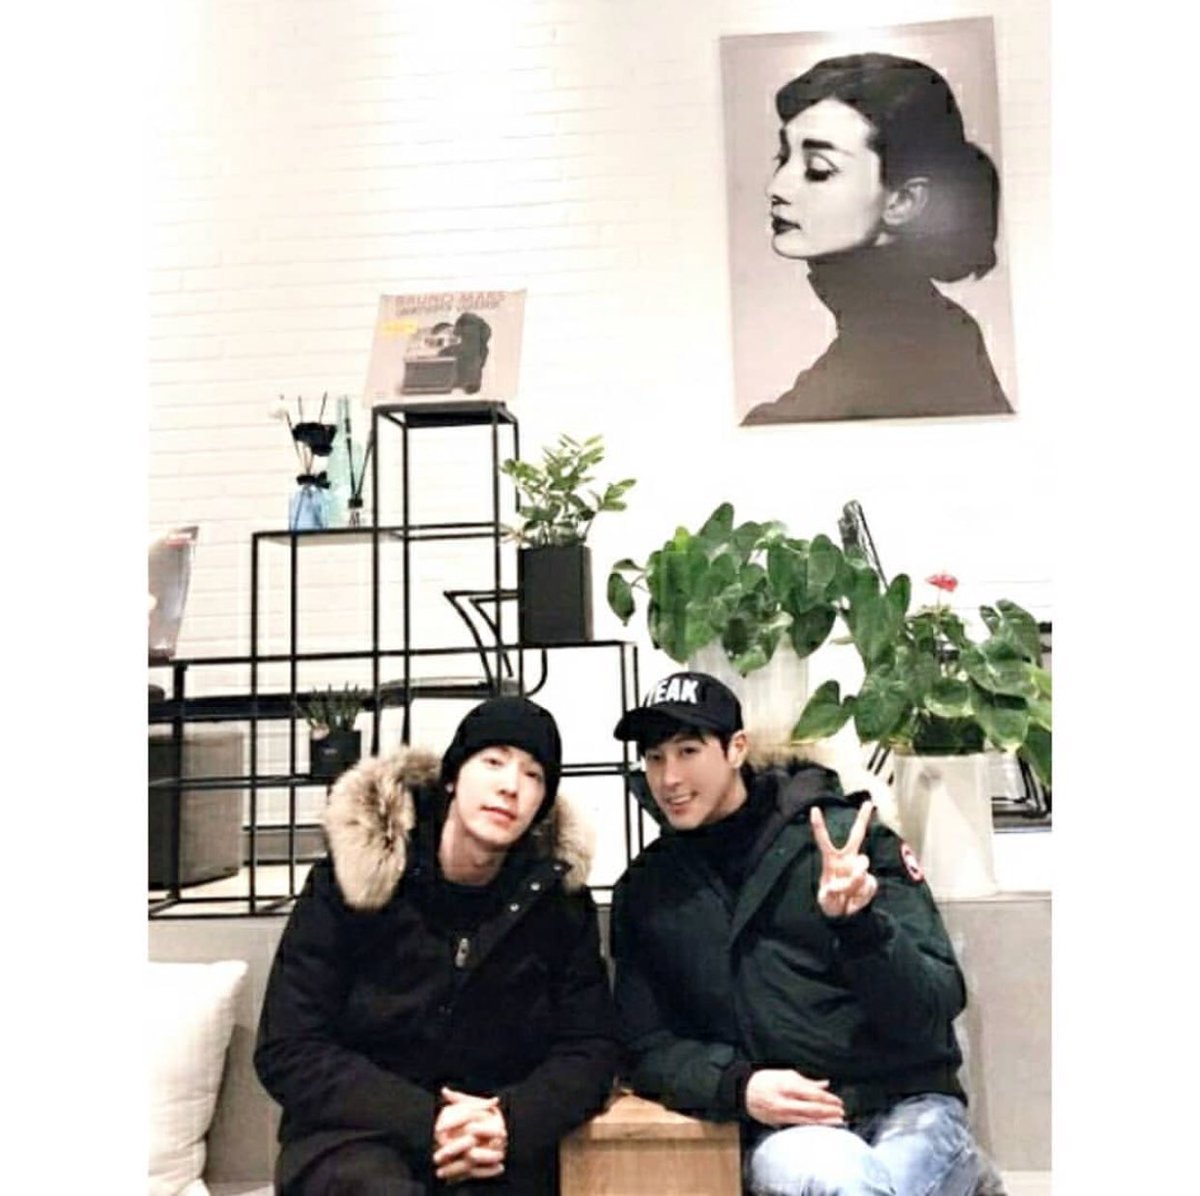 Haru&Oneday (owned by SJ Donghae)Address: 92 Achasan-ro, Seongsu 2(i)-ga 3(sam)-dong, Seongdong-gu, Seoul, South KoreaPrice: $-$$Yunho visited this café at Seongsu-dong. It is known for their pressed juices and calm, relaxing atmosphere.  #캉투어  https://twitter.com/Celpin_official/status/1220721466431483905